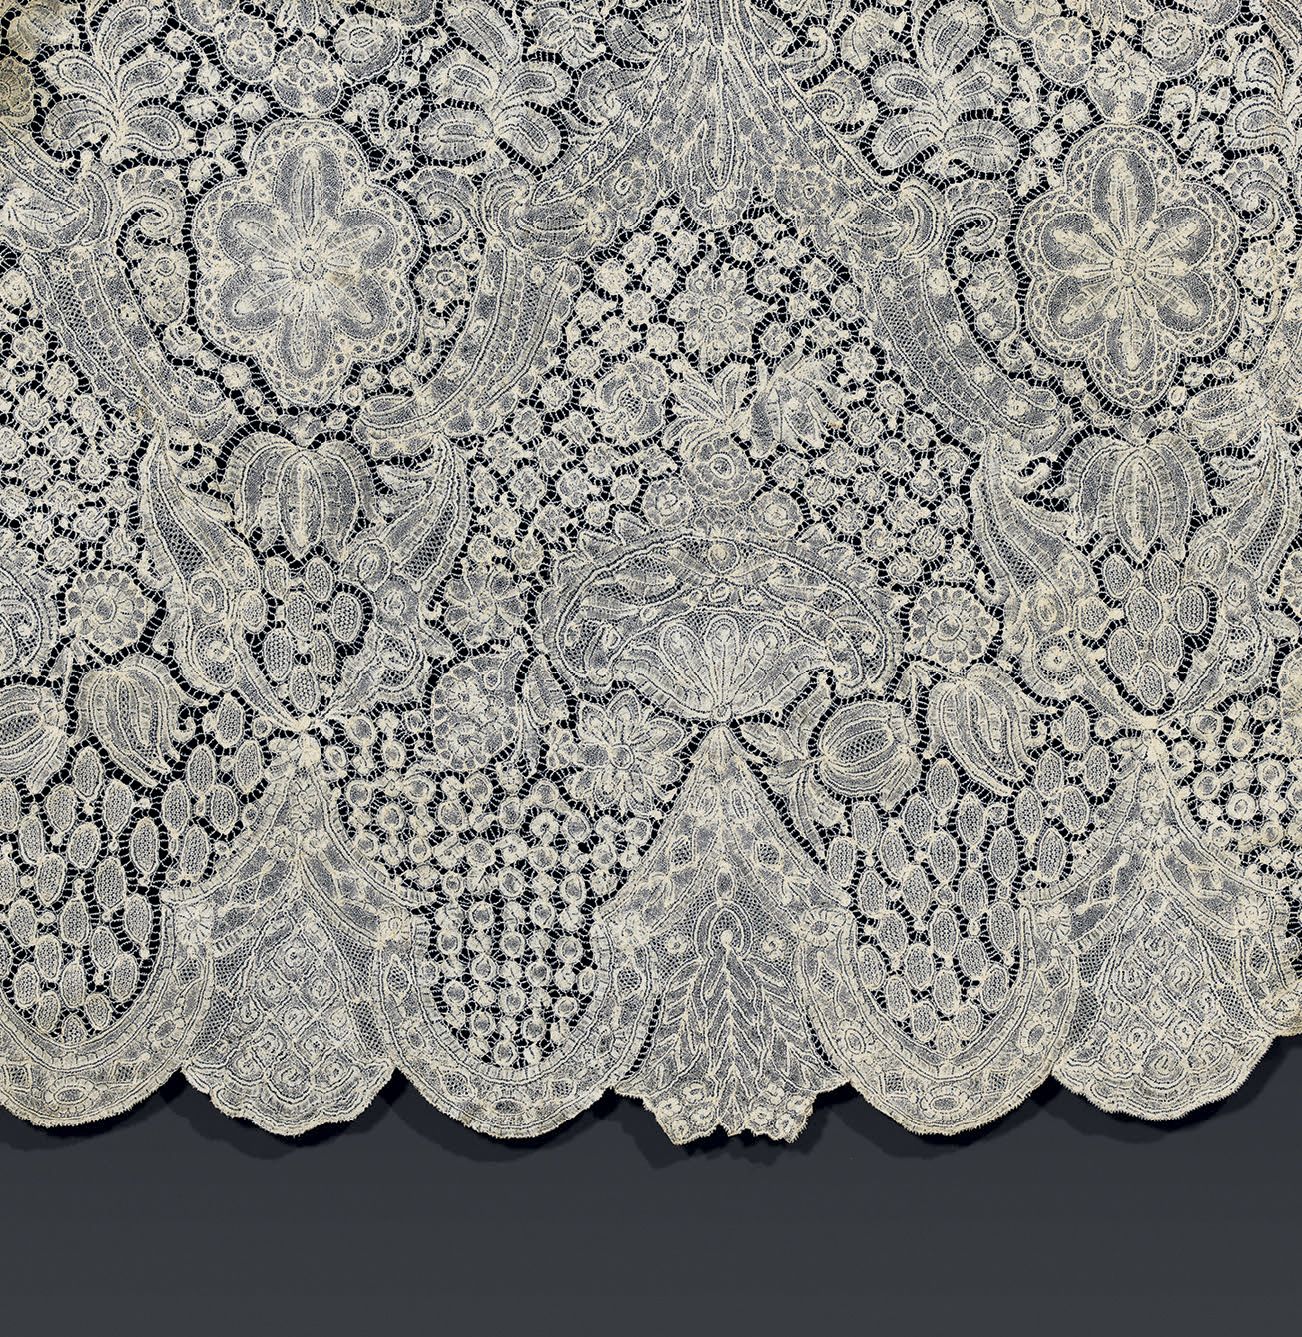 Null Bas d'aube, Brabant lace, spindles with patchwork, linen twine, circa 1720-&hellip;